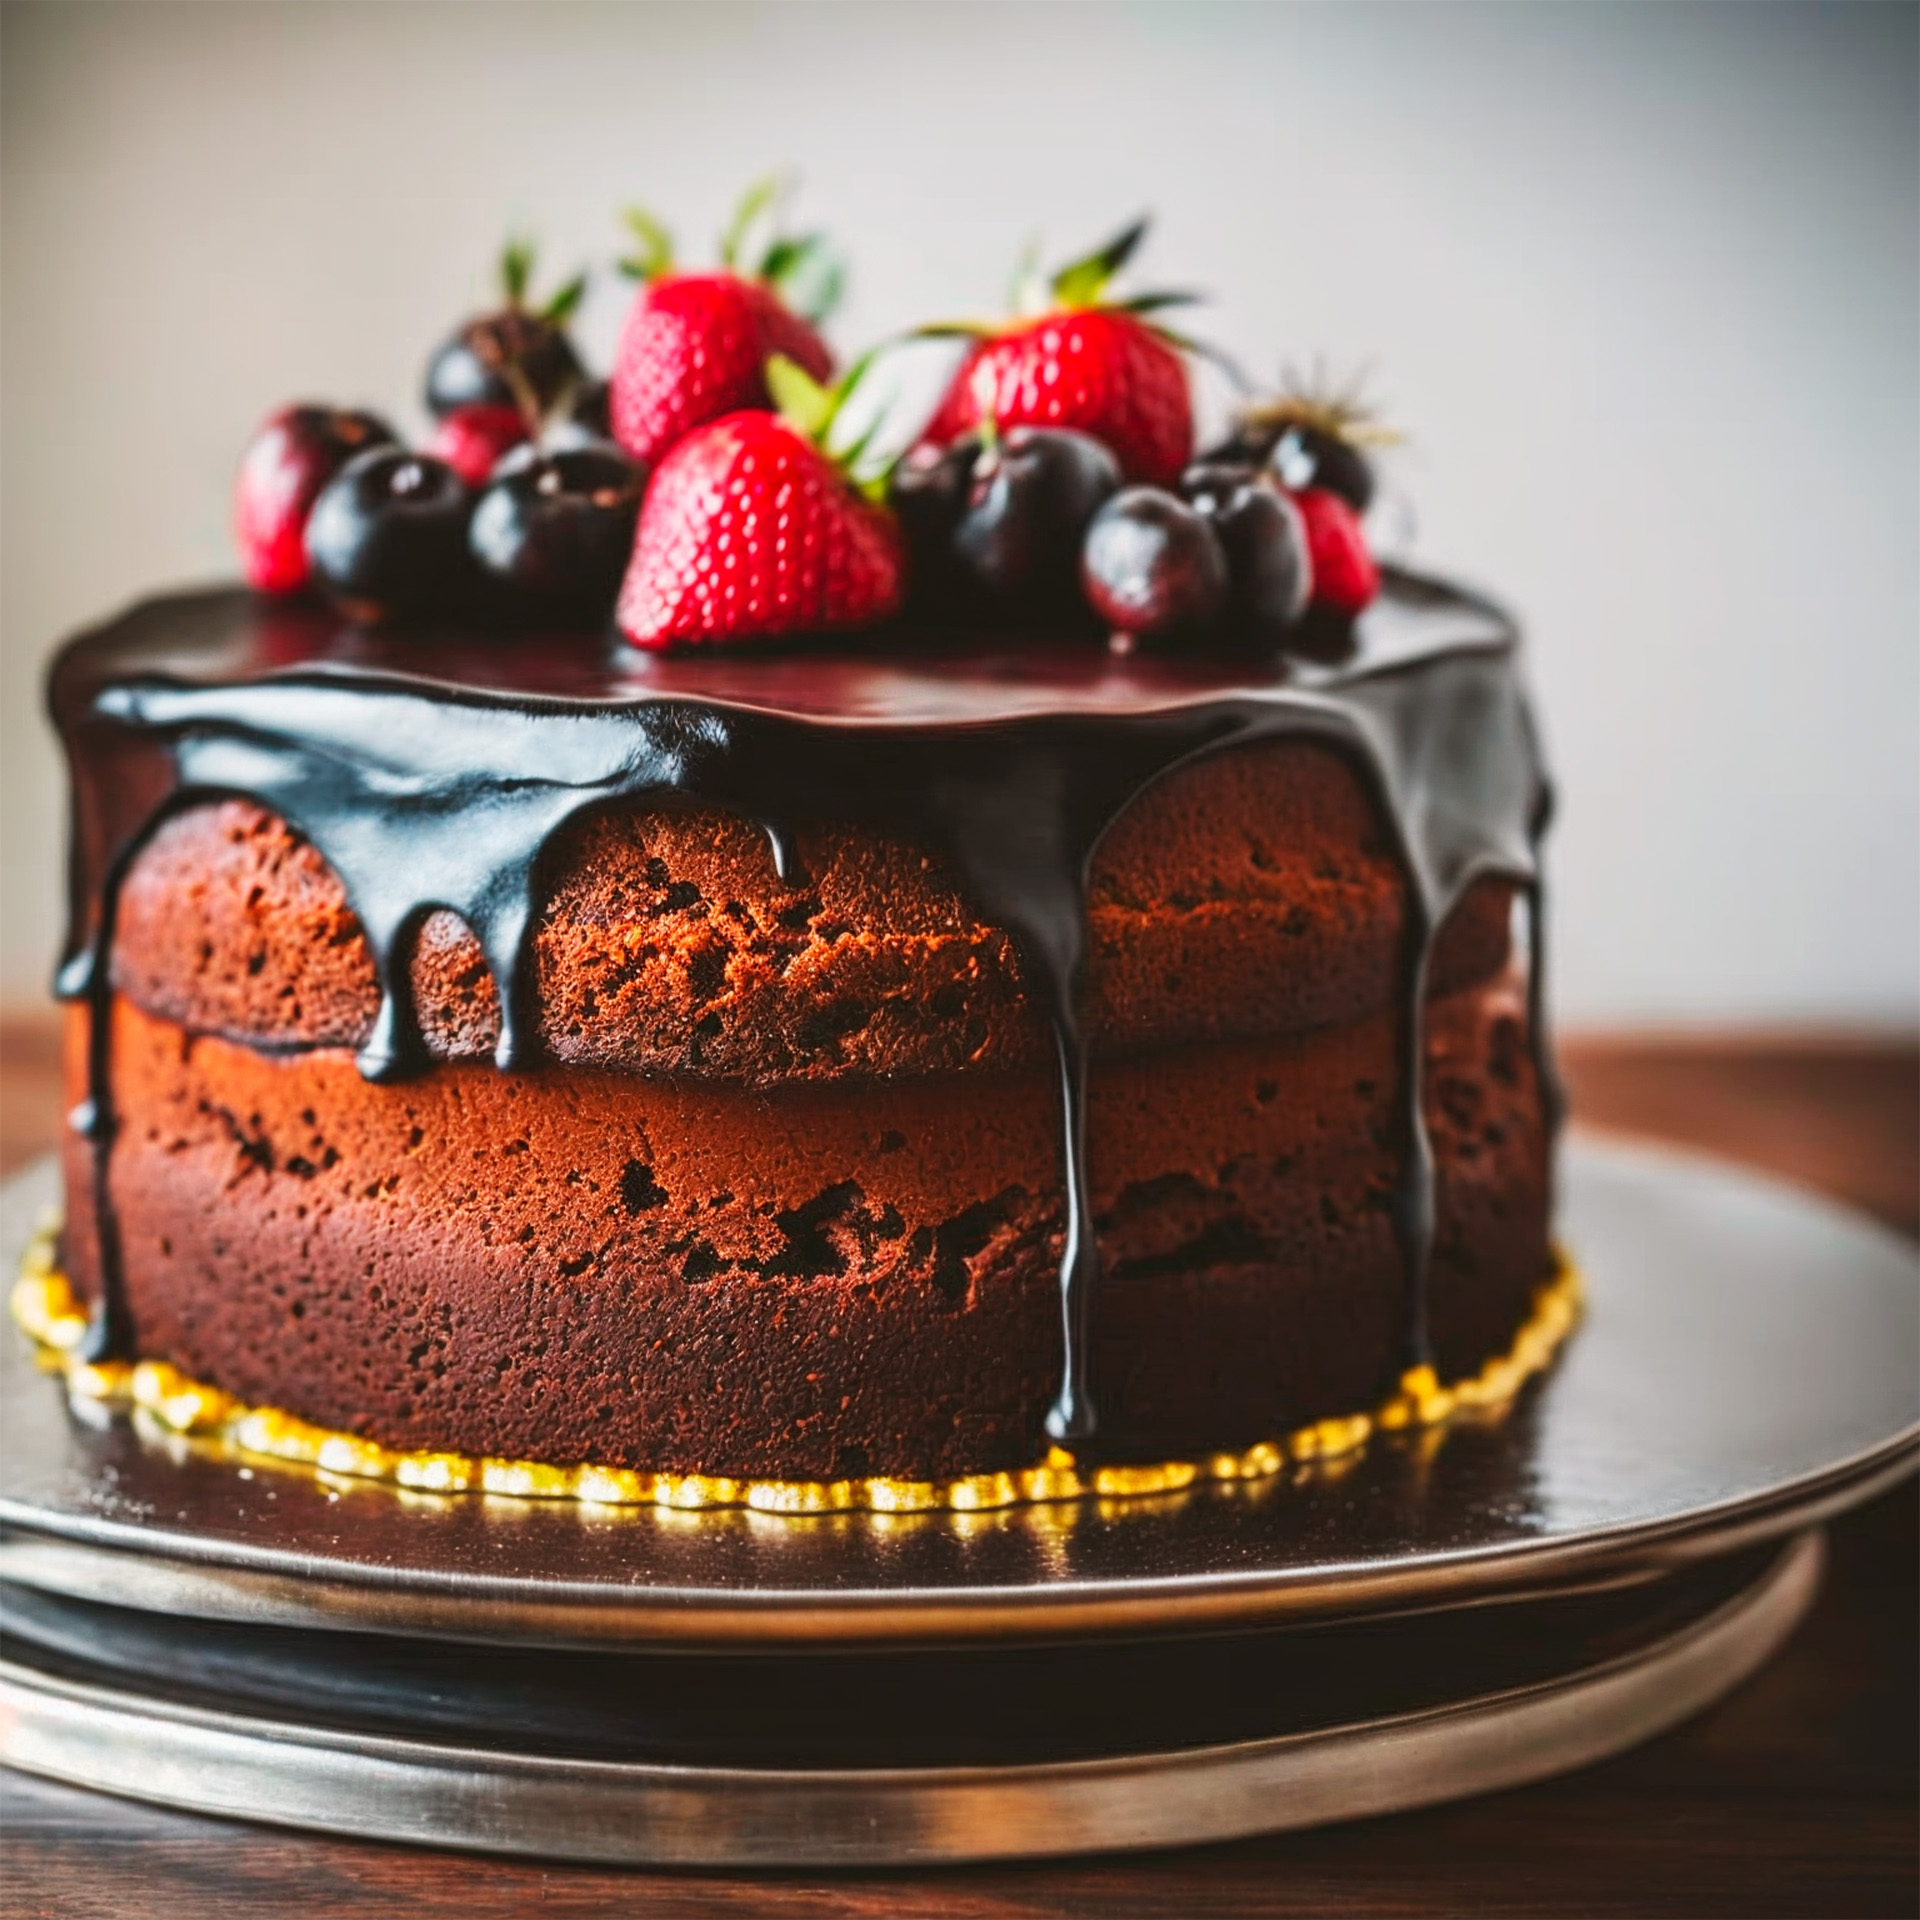 00016-2454967524-classicnegative, (low angle_1.1) close up macro photography of (black forest cake_1.2), simple bokeh background, 200mm 1